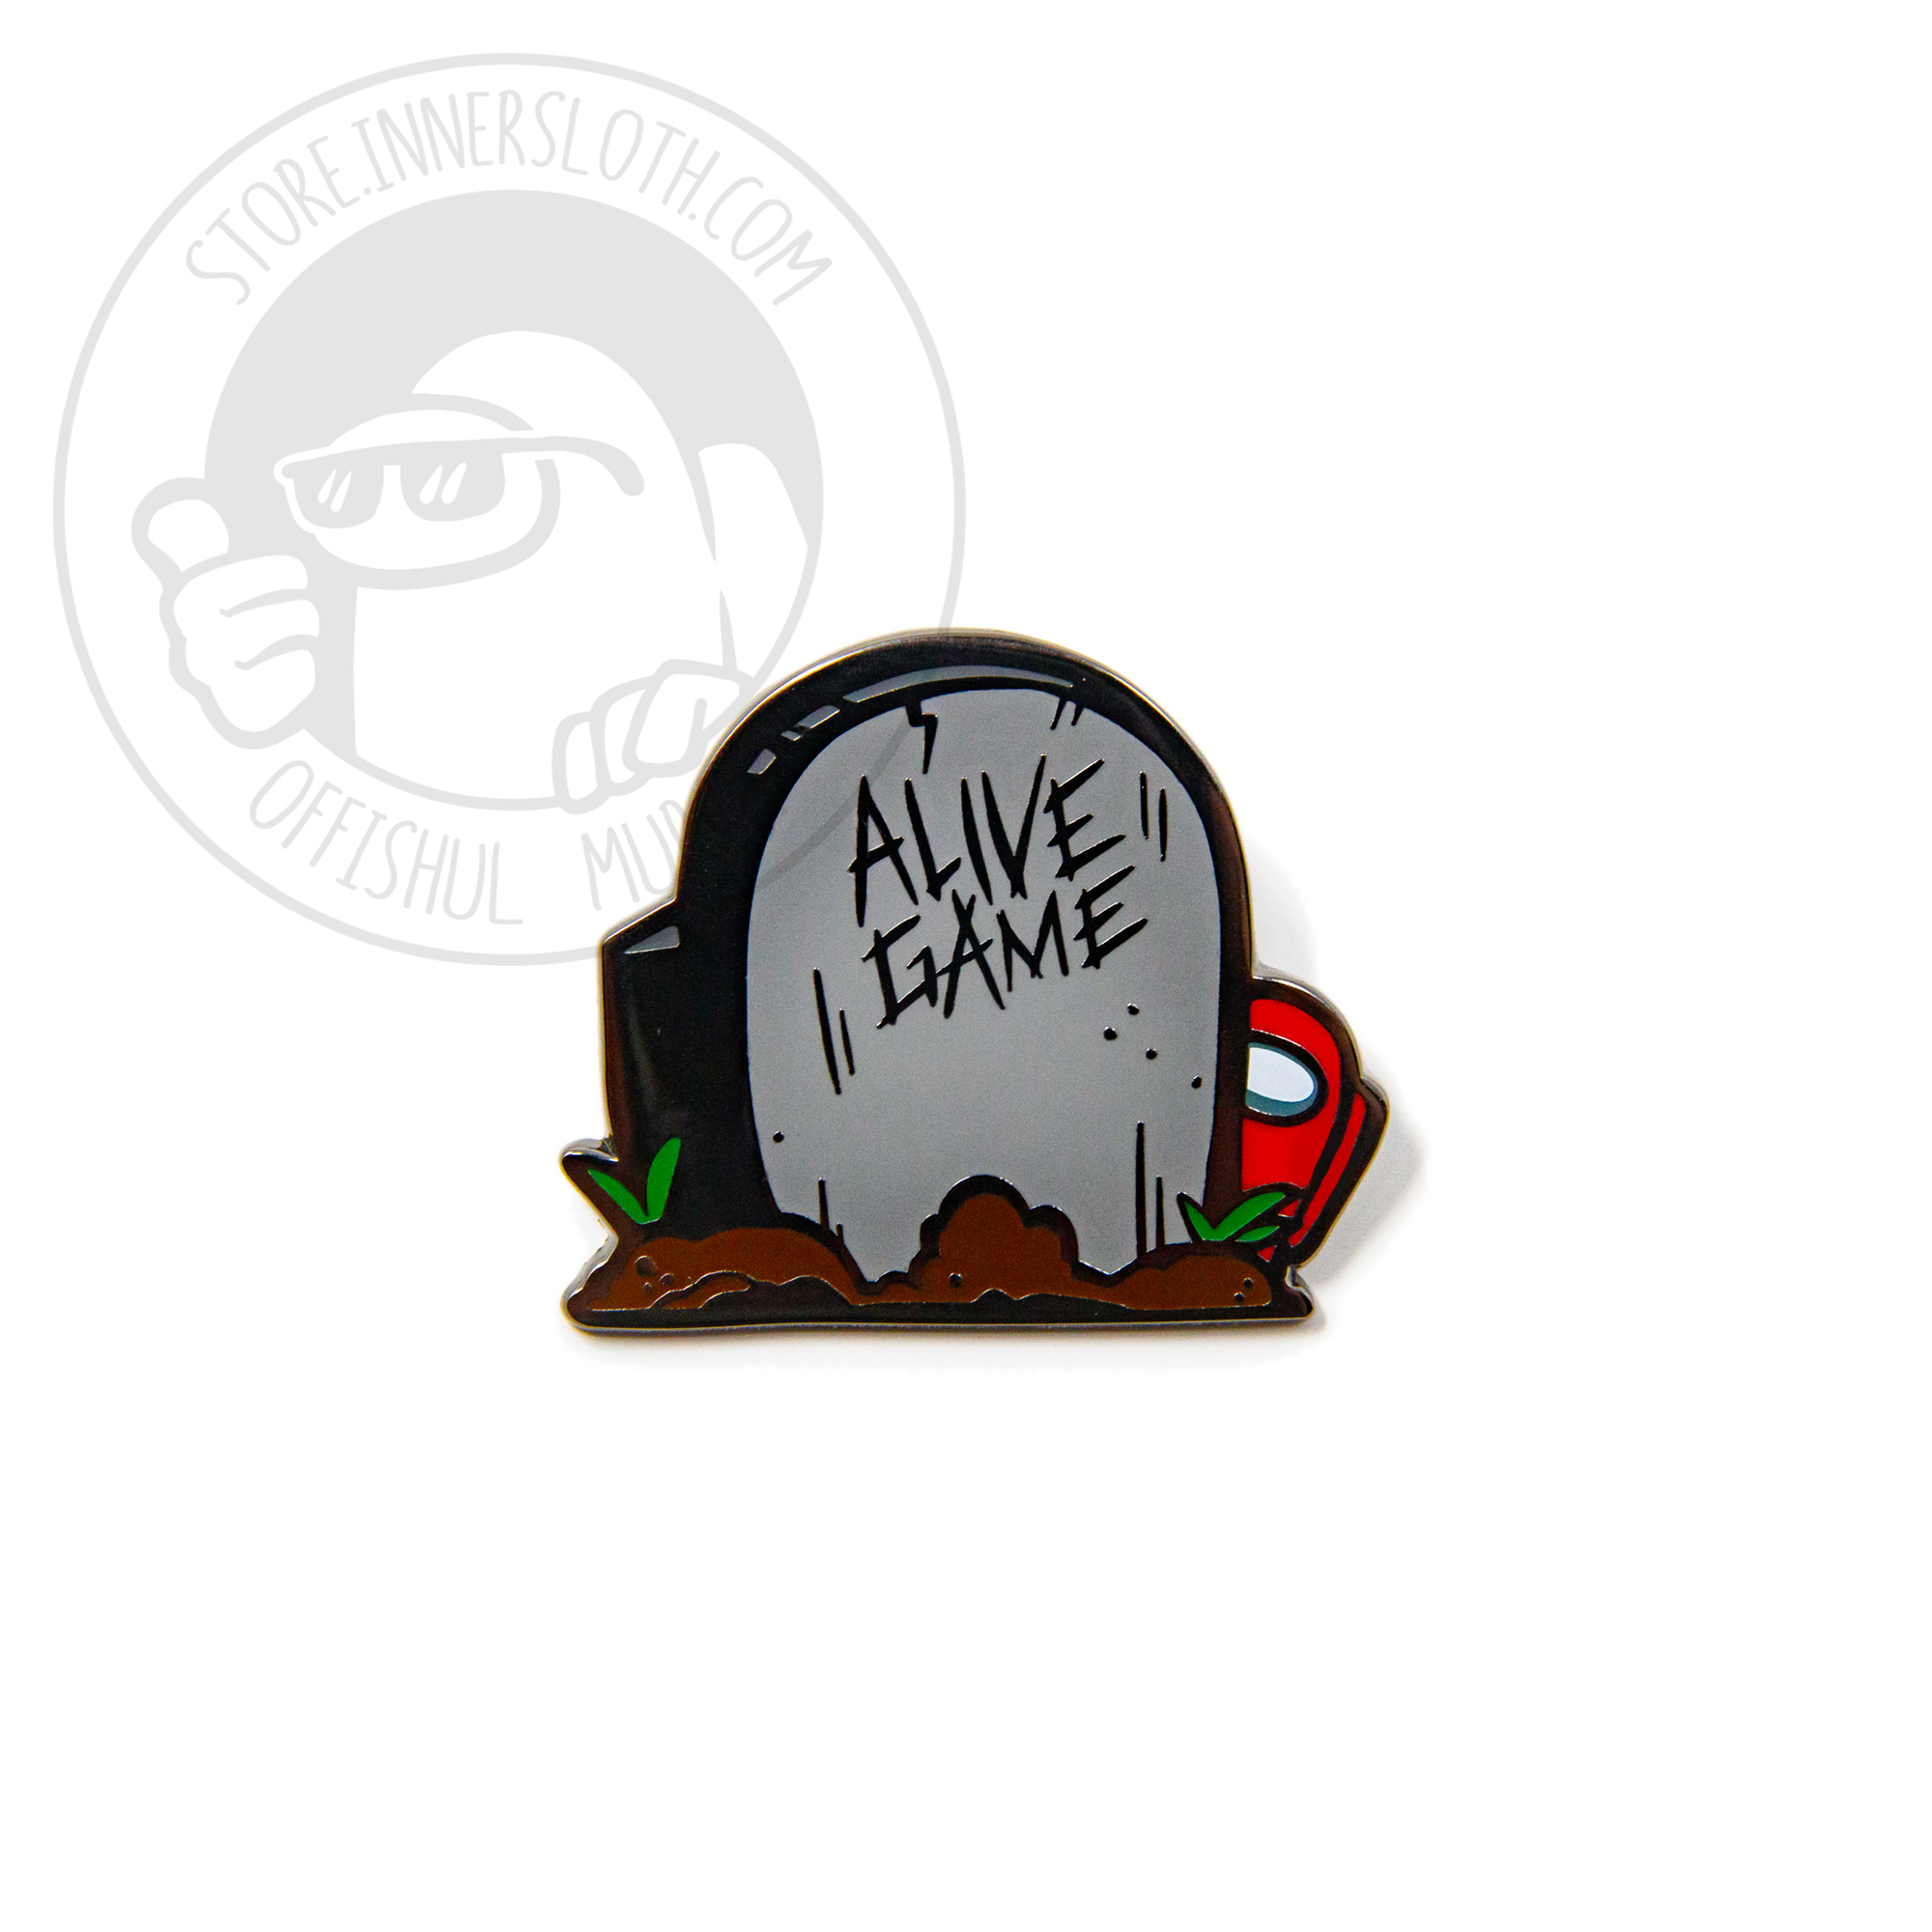 A product photo of a hard enamel pin depicting a grey headstone surrounded by small mounds of fresh dirt and grass sprouts. The headstone is vaguely crewmate-shaped, and reads “ALIVE GAME.” A small red crewmate peeks out from behind the headstone.